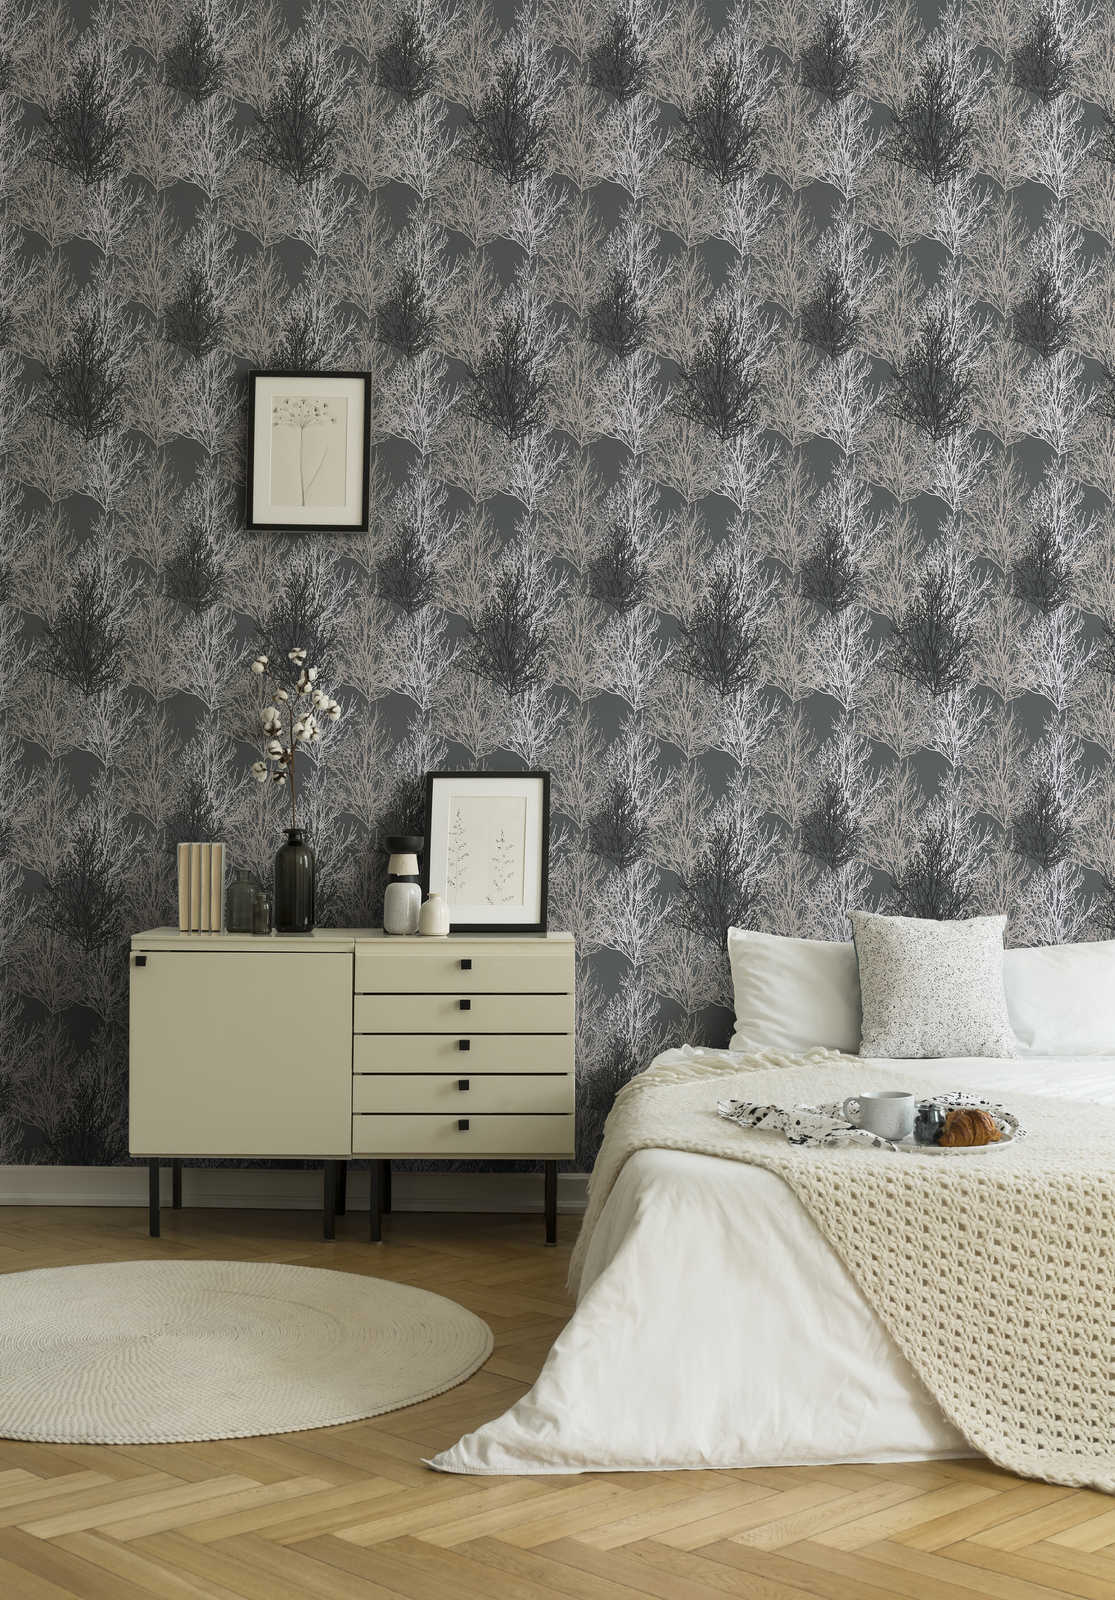             Wallpaper tree design with metallic colours & textured pattern - grey
        